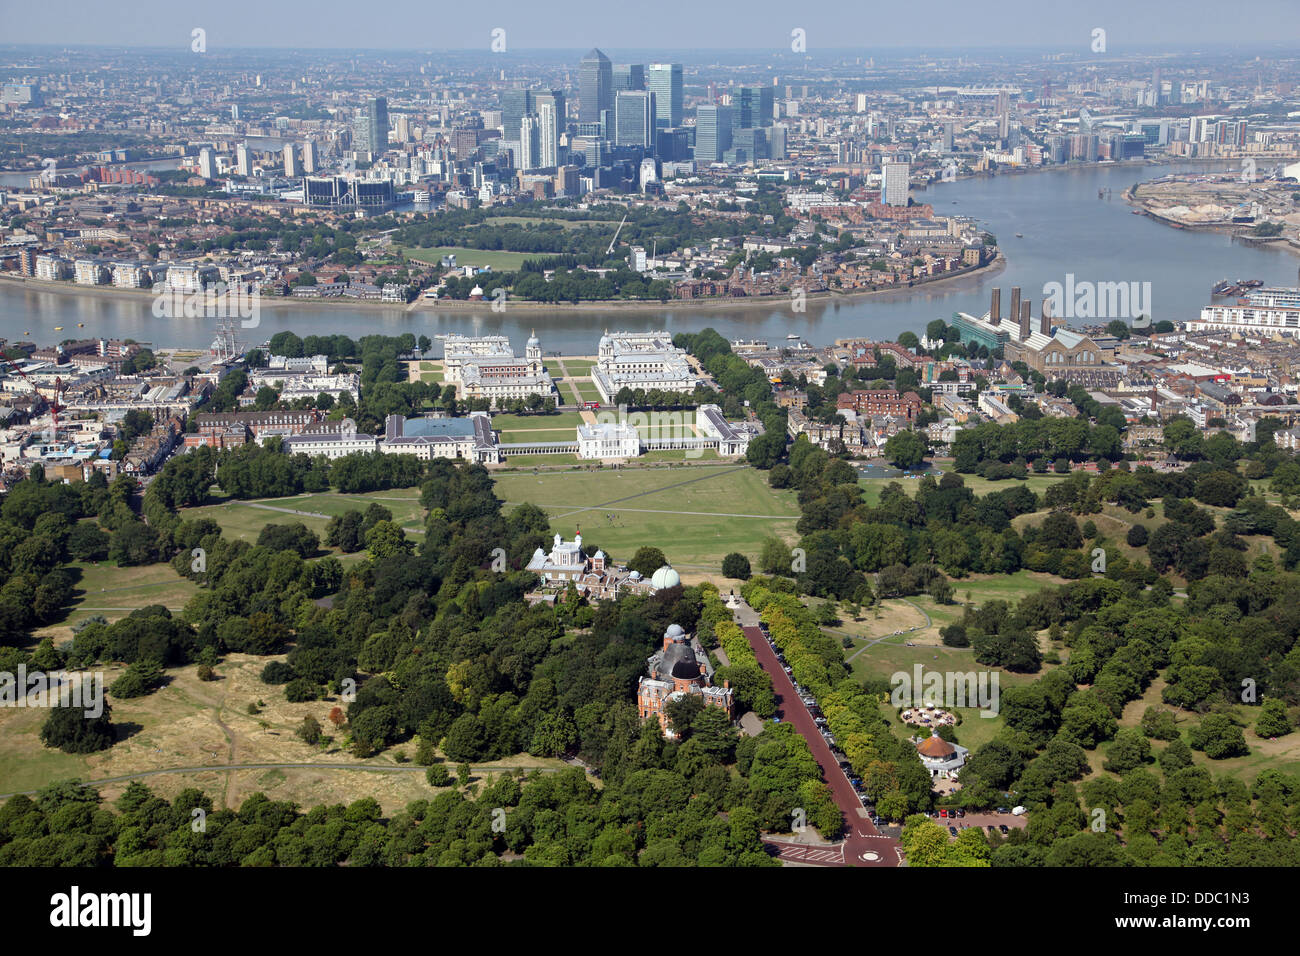 Aus der Vogelperspektive auf Greenwich Park, Royal Observatory, Prime Merdian, Themse, Isle of Dogs & Canary Wharf in East London Stockfoto